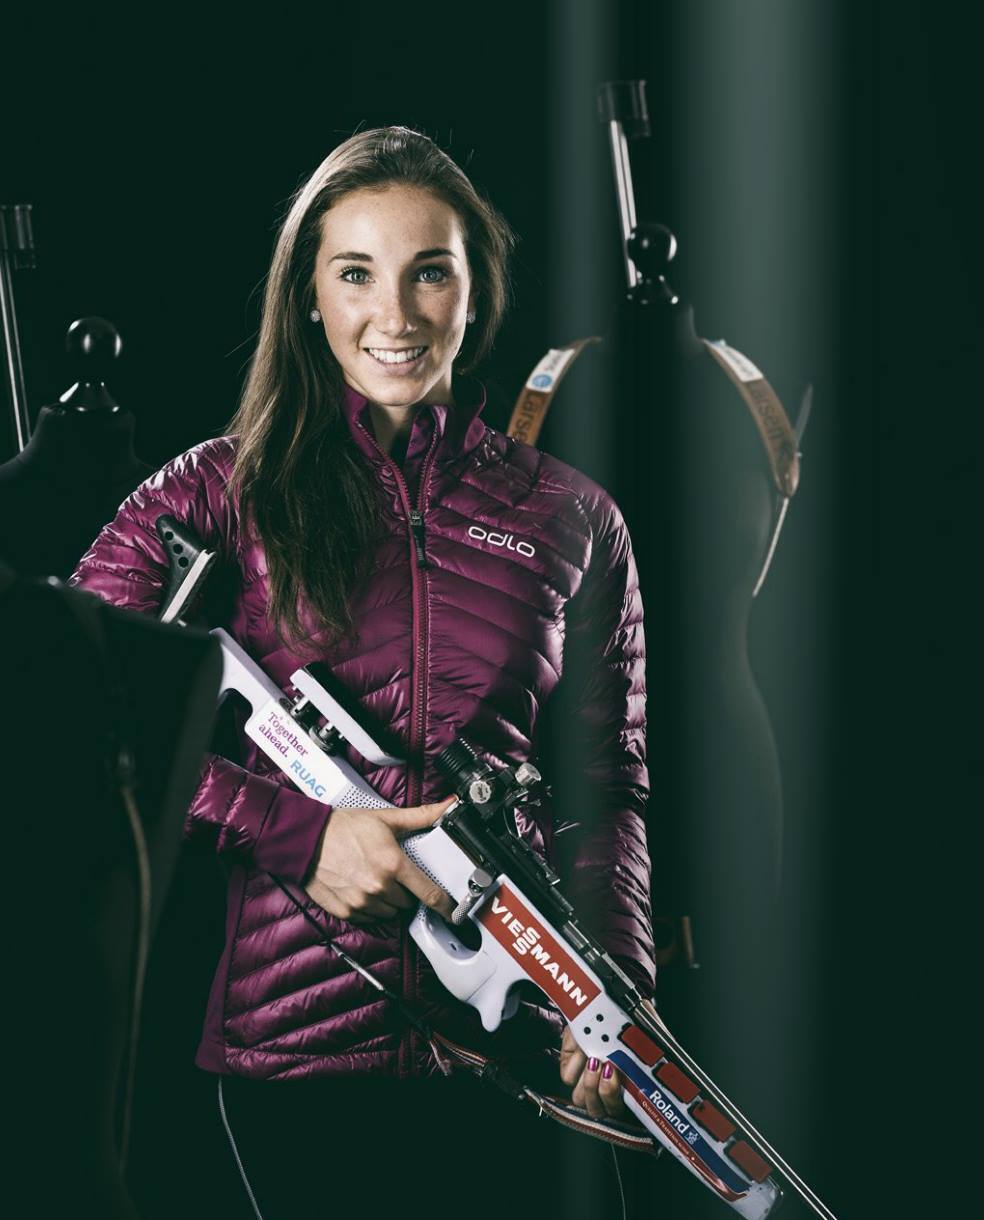 The Ukrainian biathlon star fell in love with a famous Swiss woman and unwittingly became related to a Putin fan: the romance began in the sky and survived the Covid